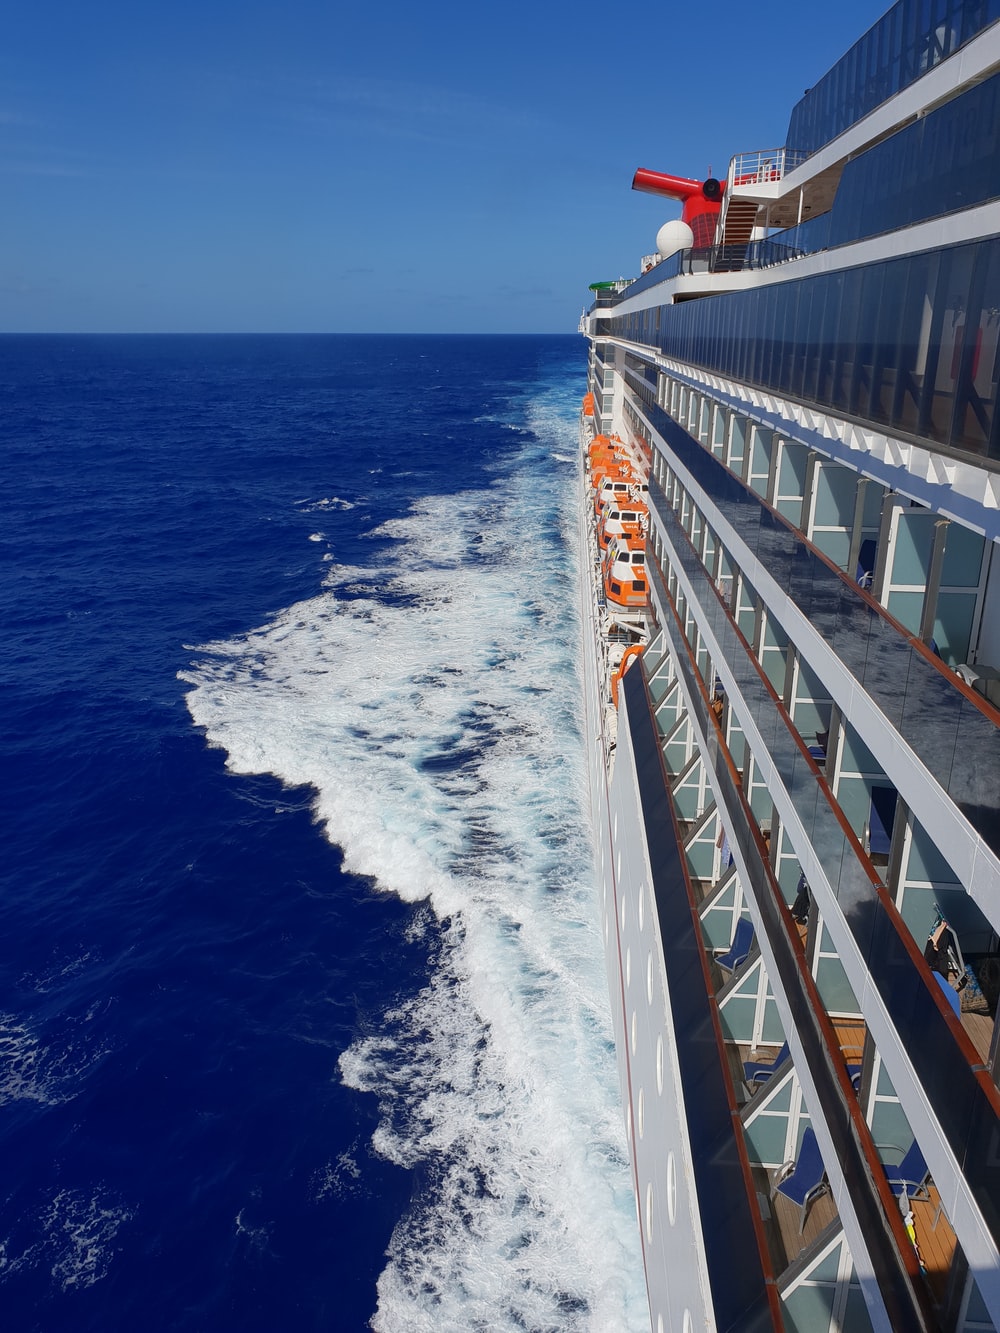 Carnival Cruise Picture. Download Free Image